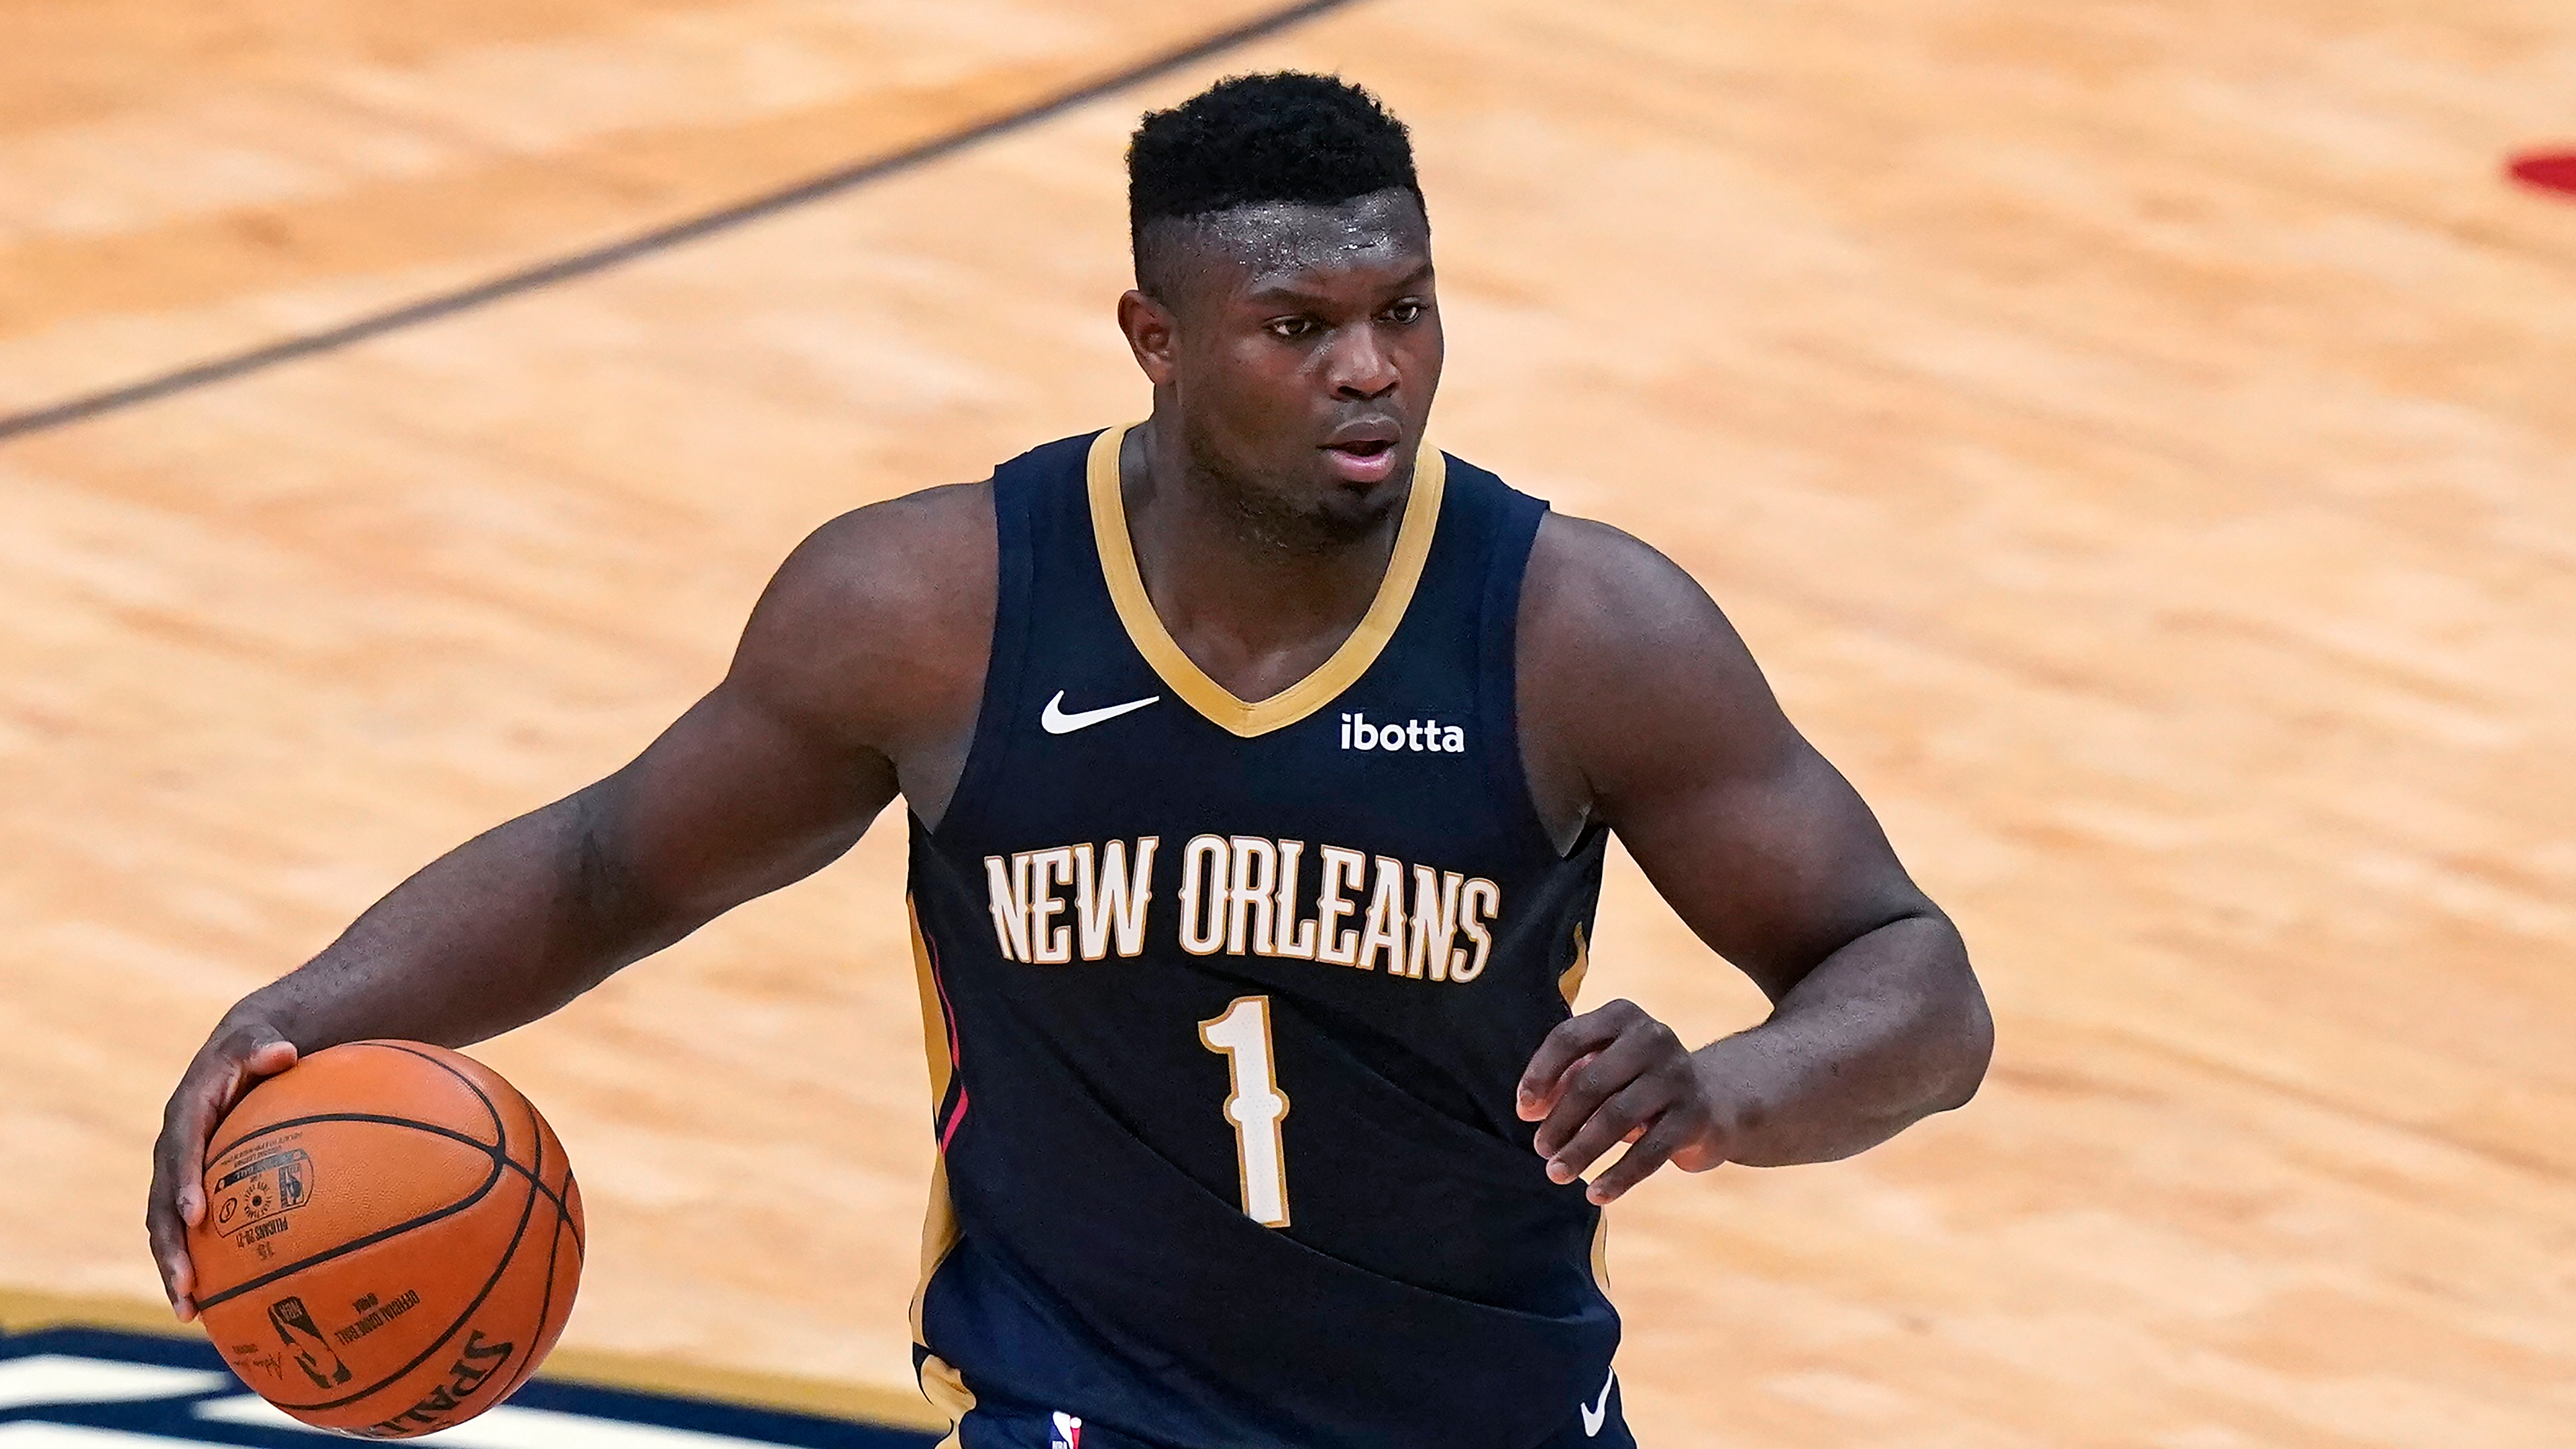 How Does Zion Williamson's Vertical Compare to Past NBA Stars? - FanBuzz